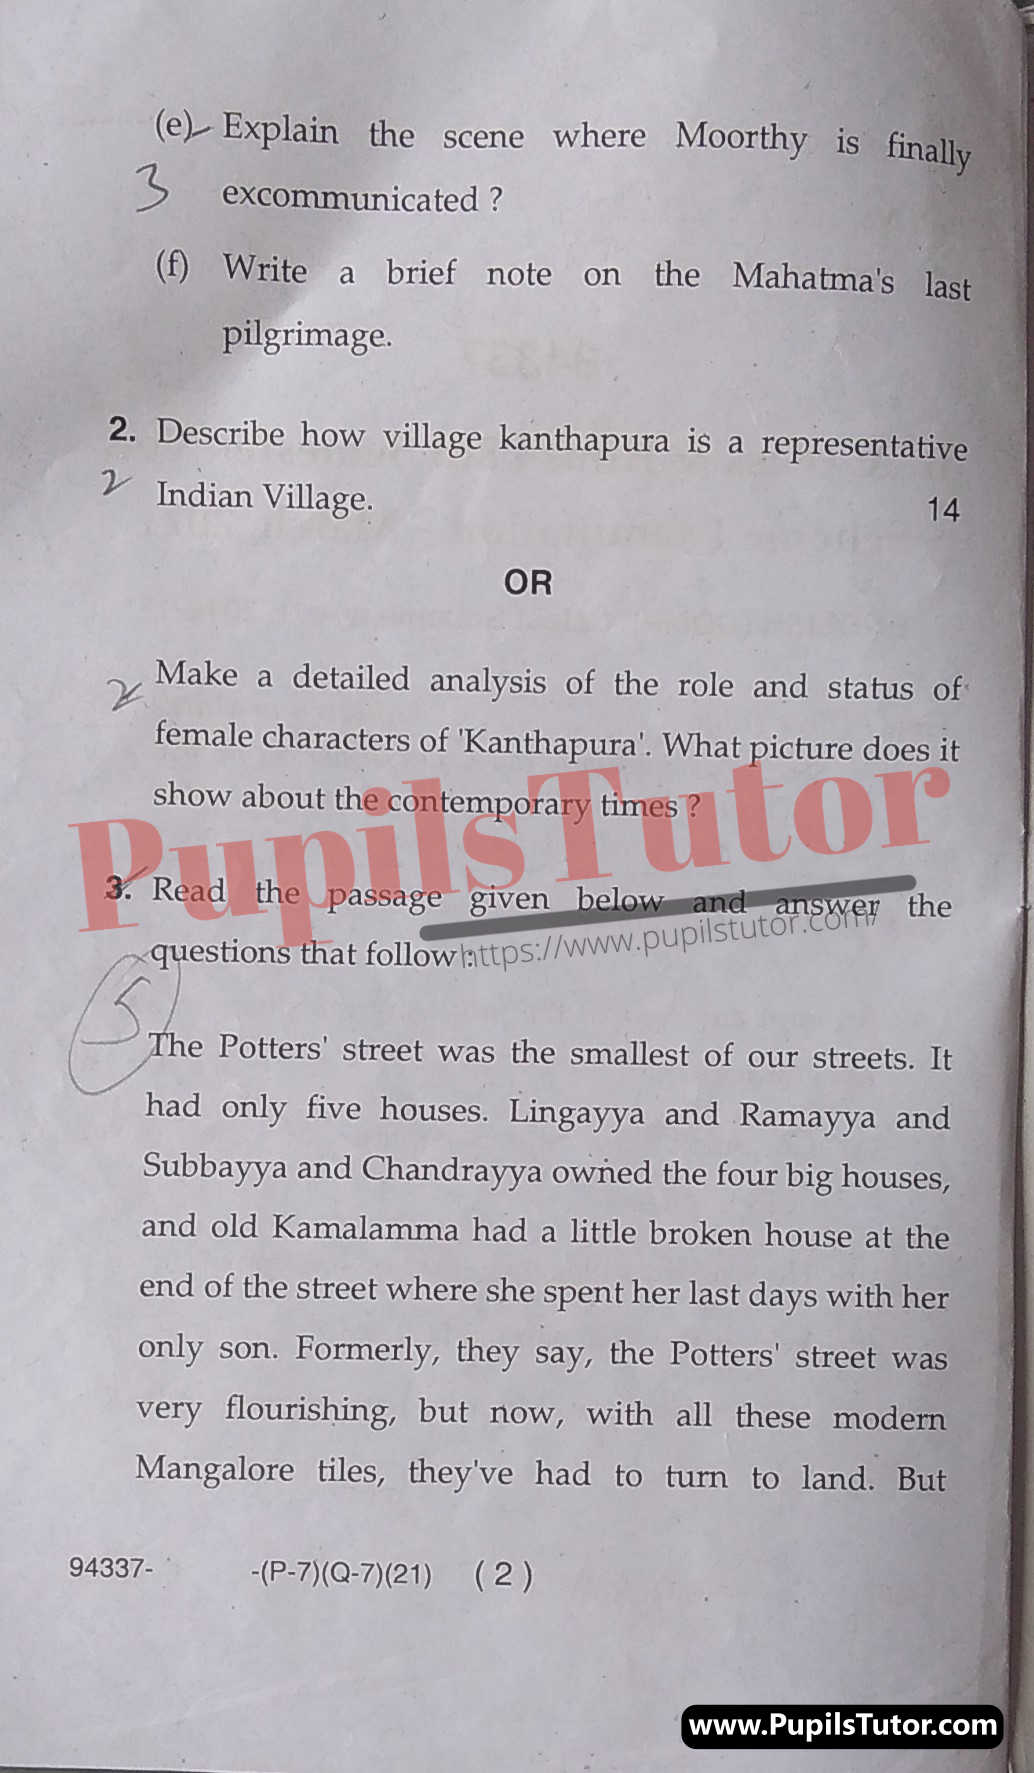 M.D. University B.A. English (Compulsory) 5th Semester Important Question Answer And Solution - www.pupilstutor.com (Paper Page Number 2)